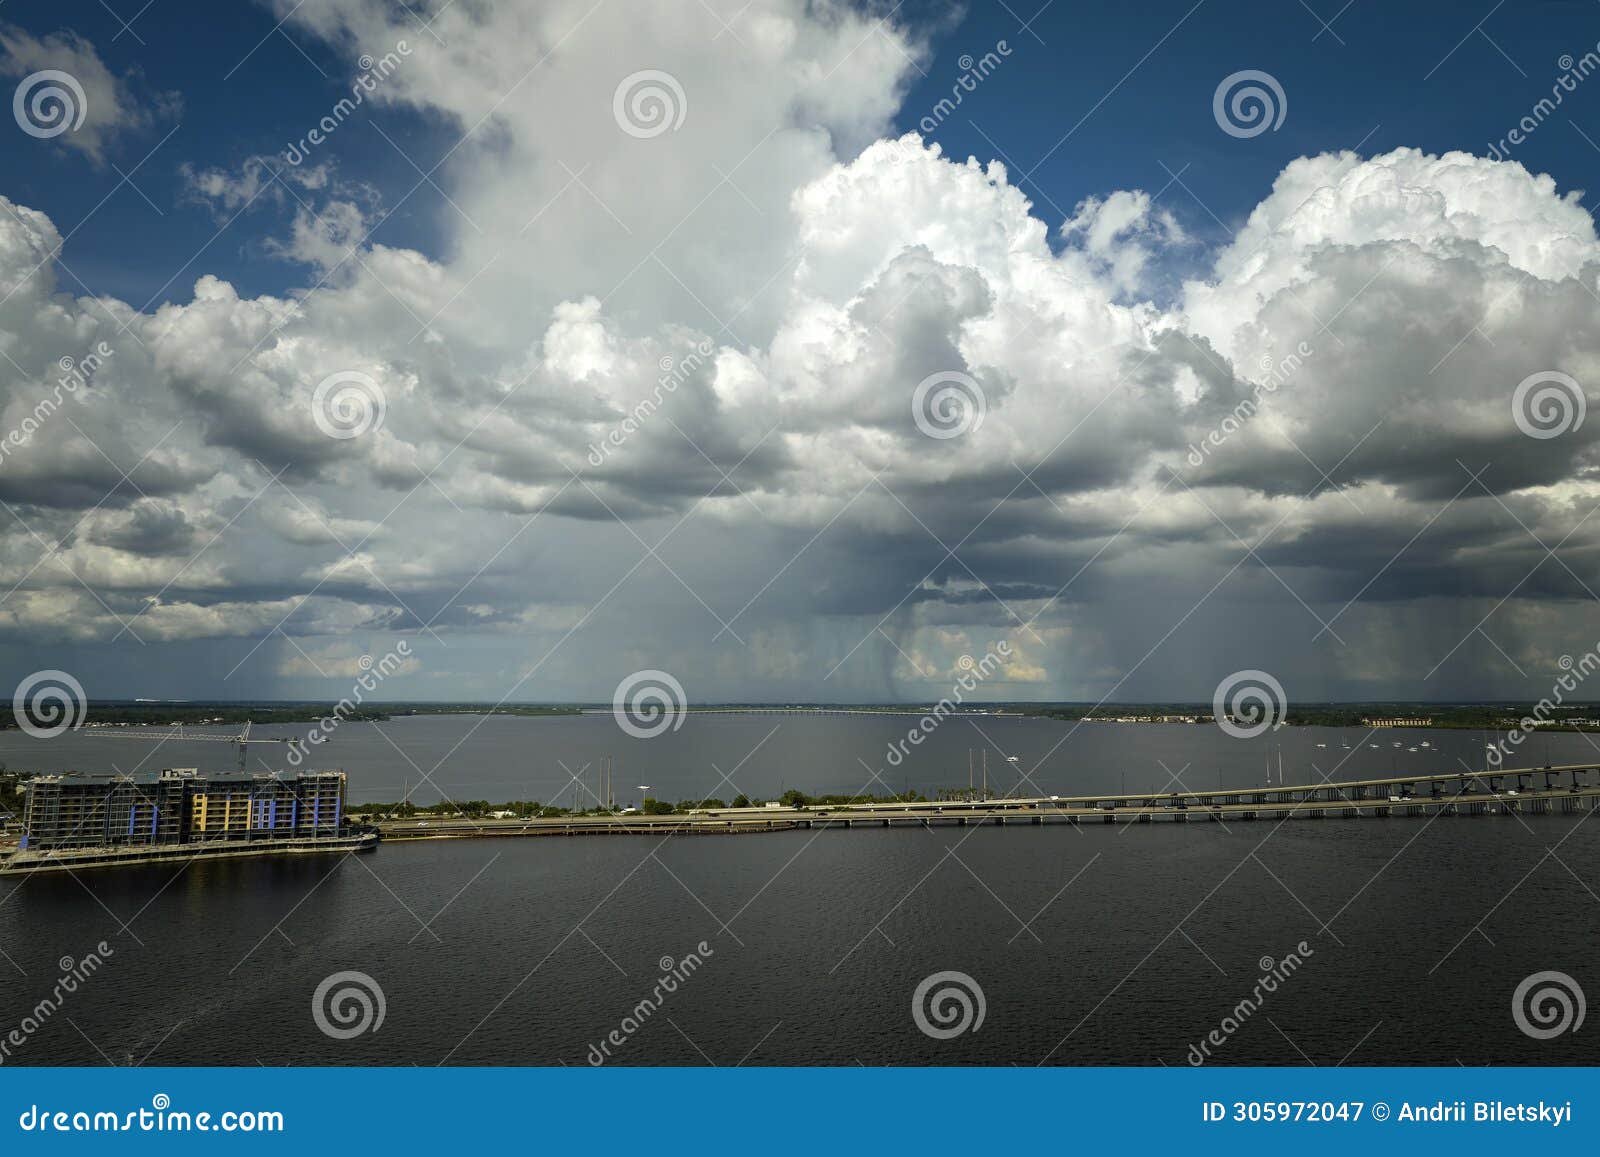 heavy thunderstorm approaching traffic bridge connecting punta gorda and port charlotte over peace river. bad weather